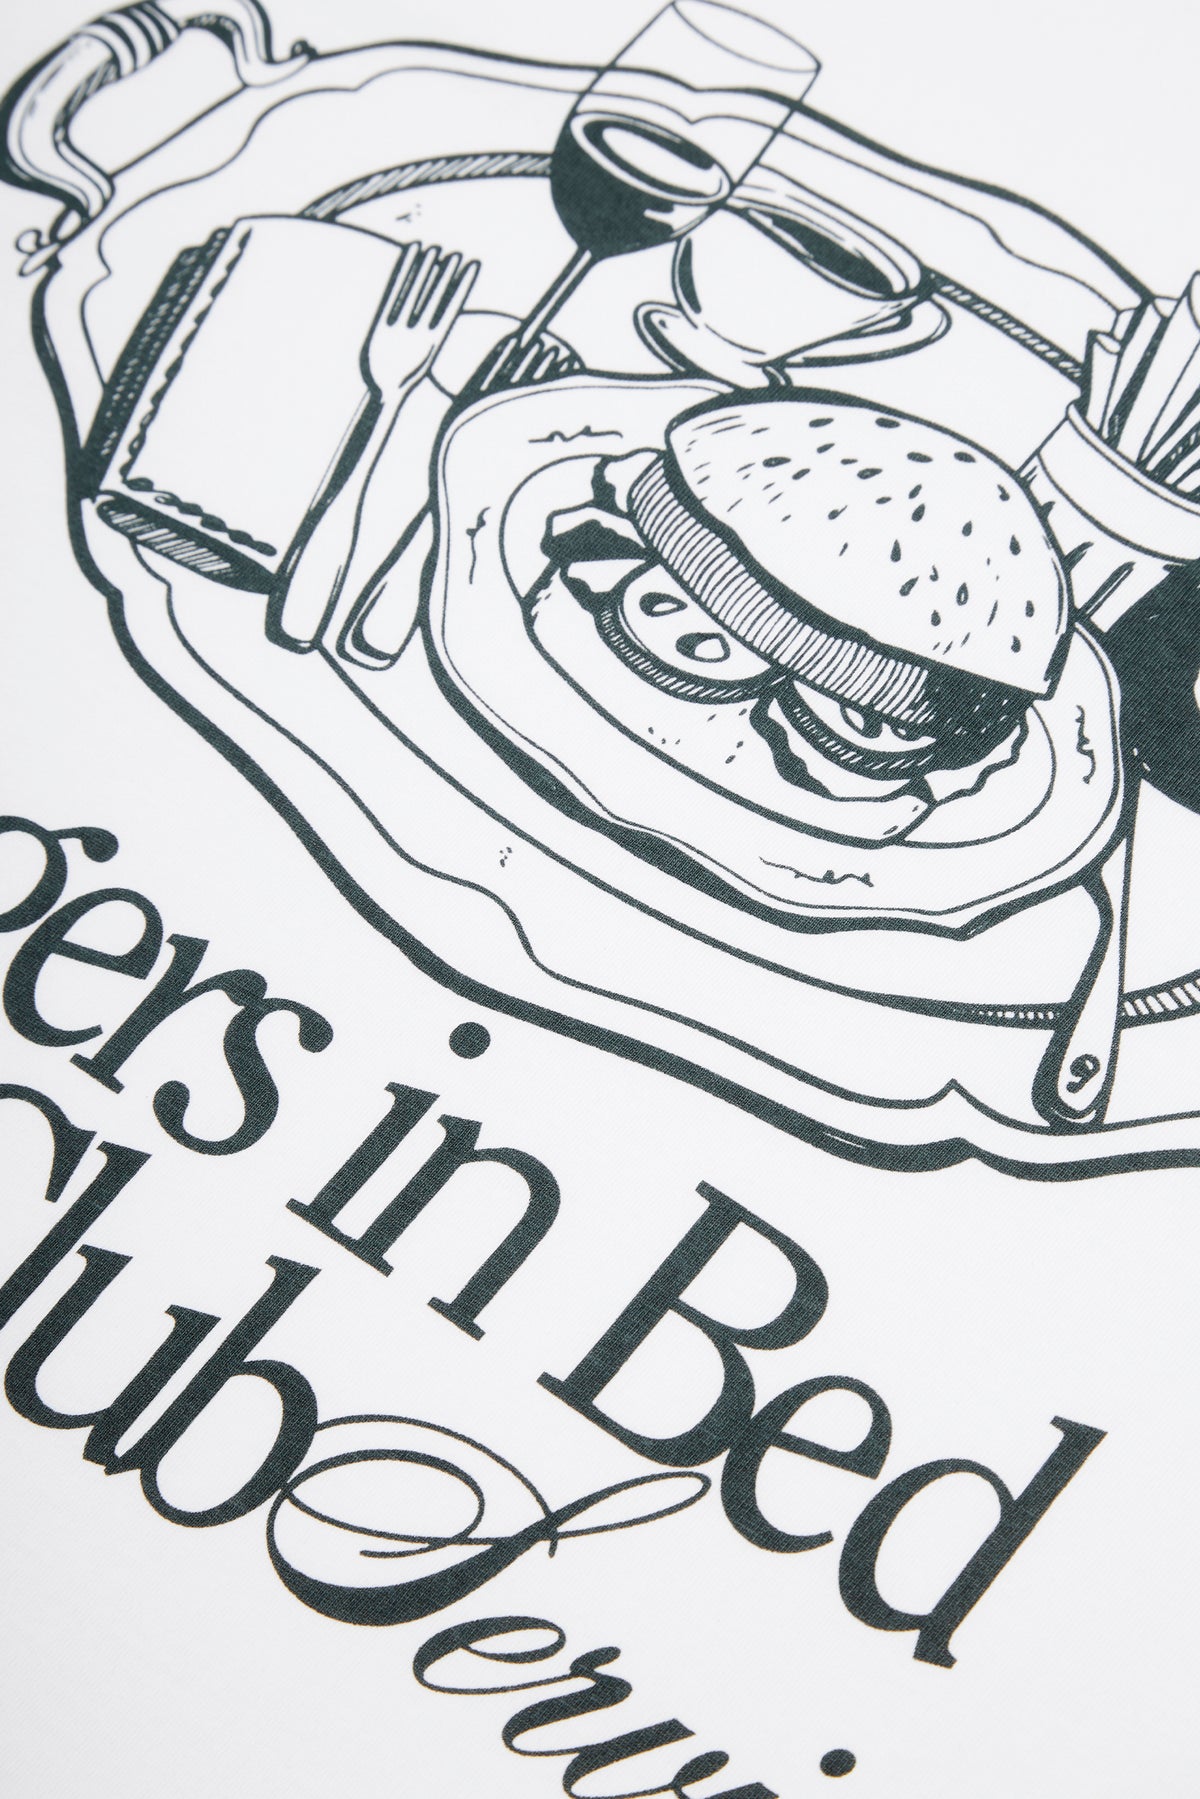 BURGERS IN BED GRAPHIC TEE